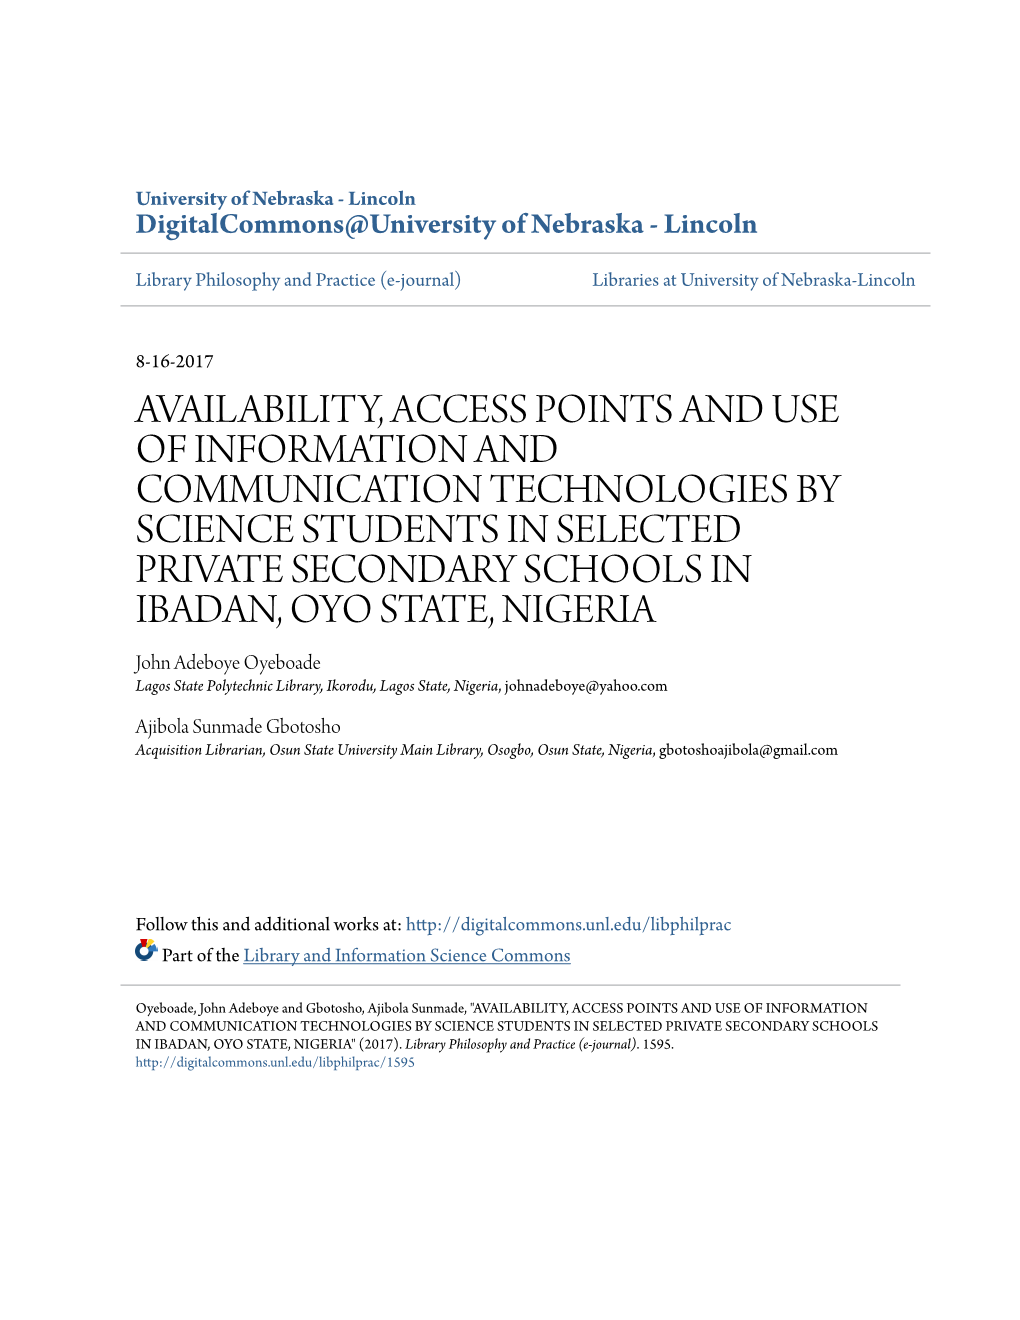 Availability, Access Points and Use of Information and Communication Technologies by Science Students in Selected Private Second